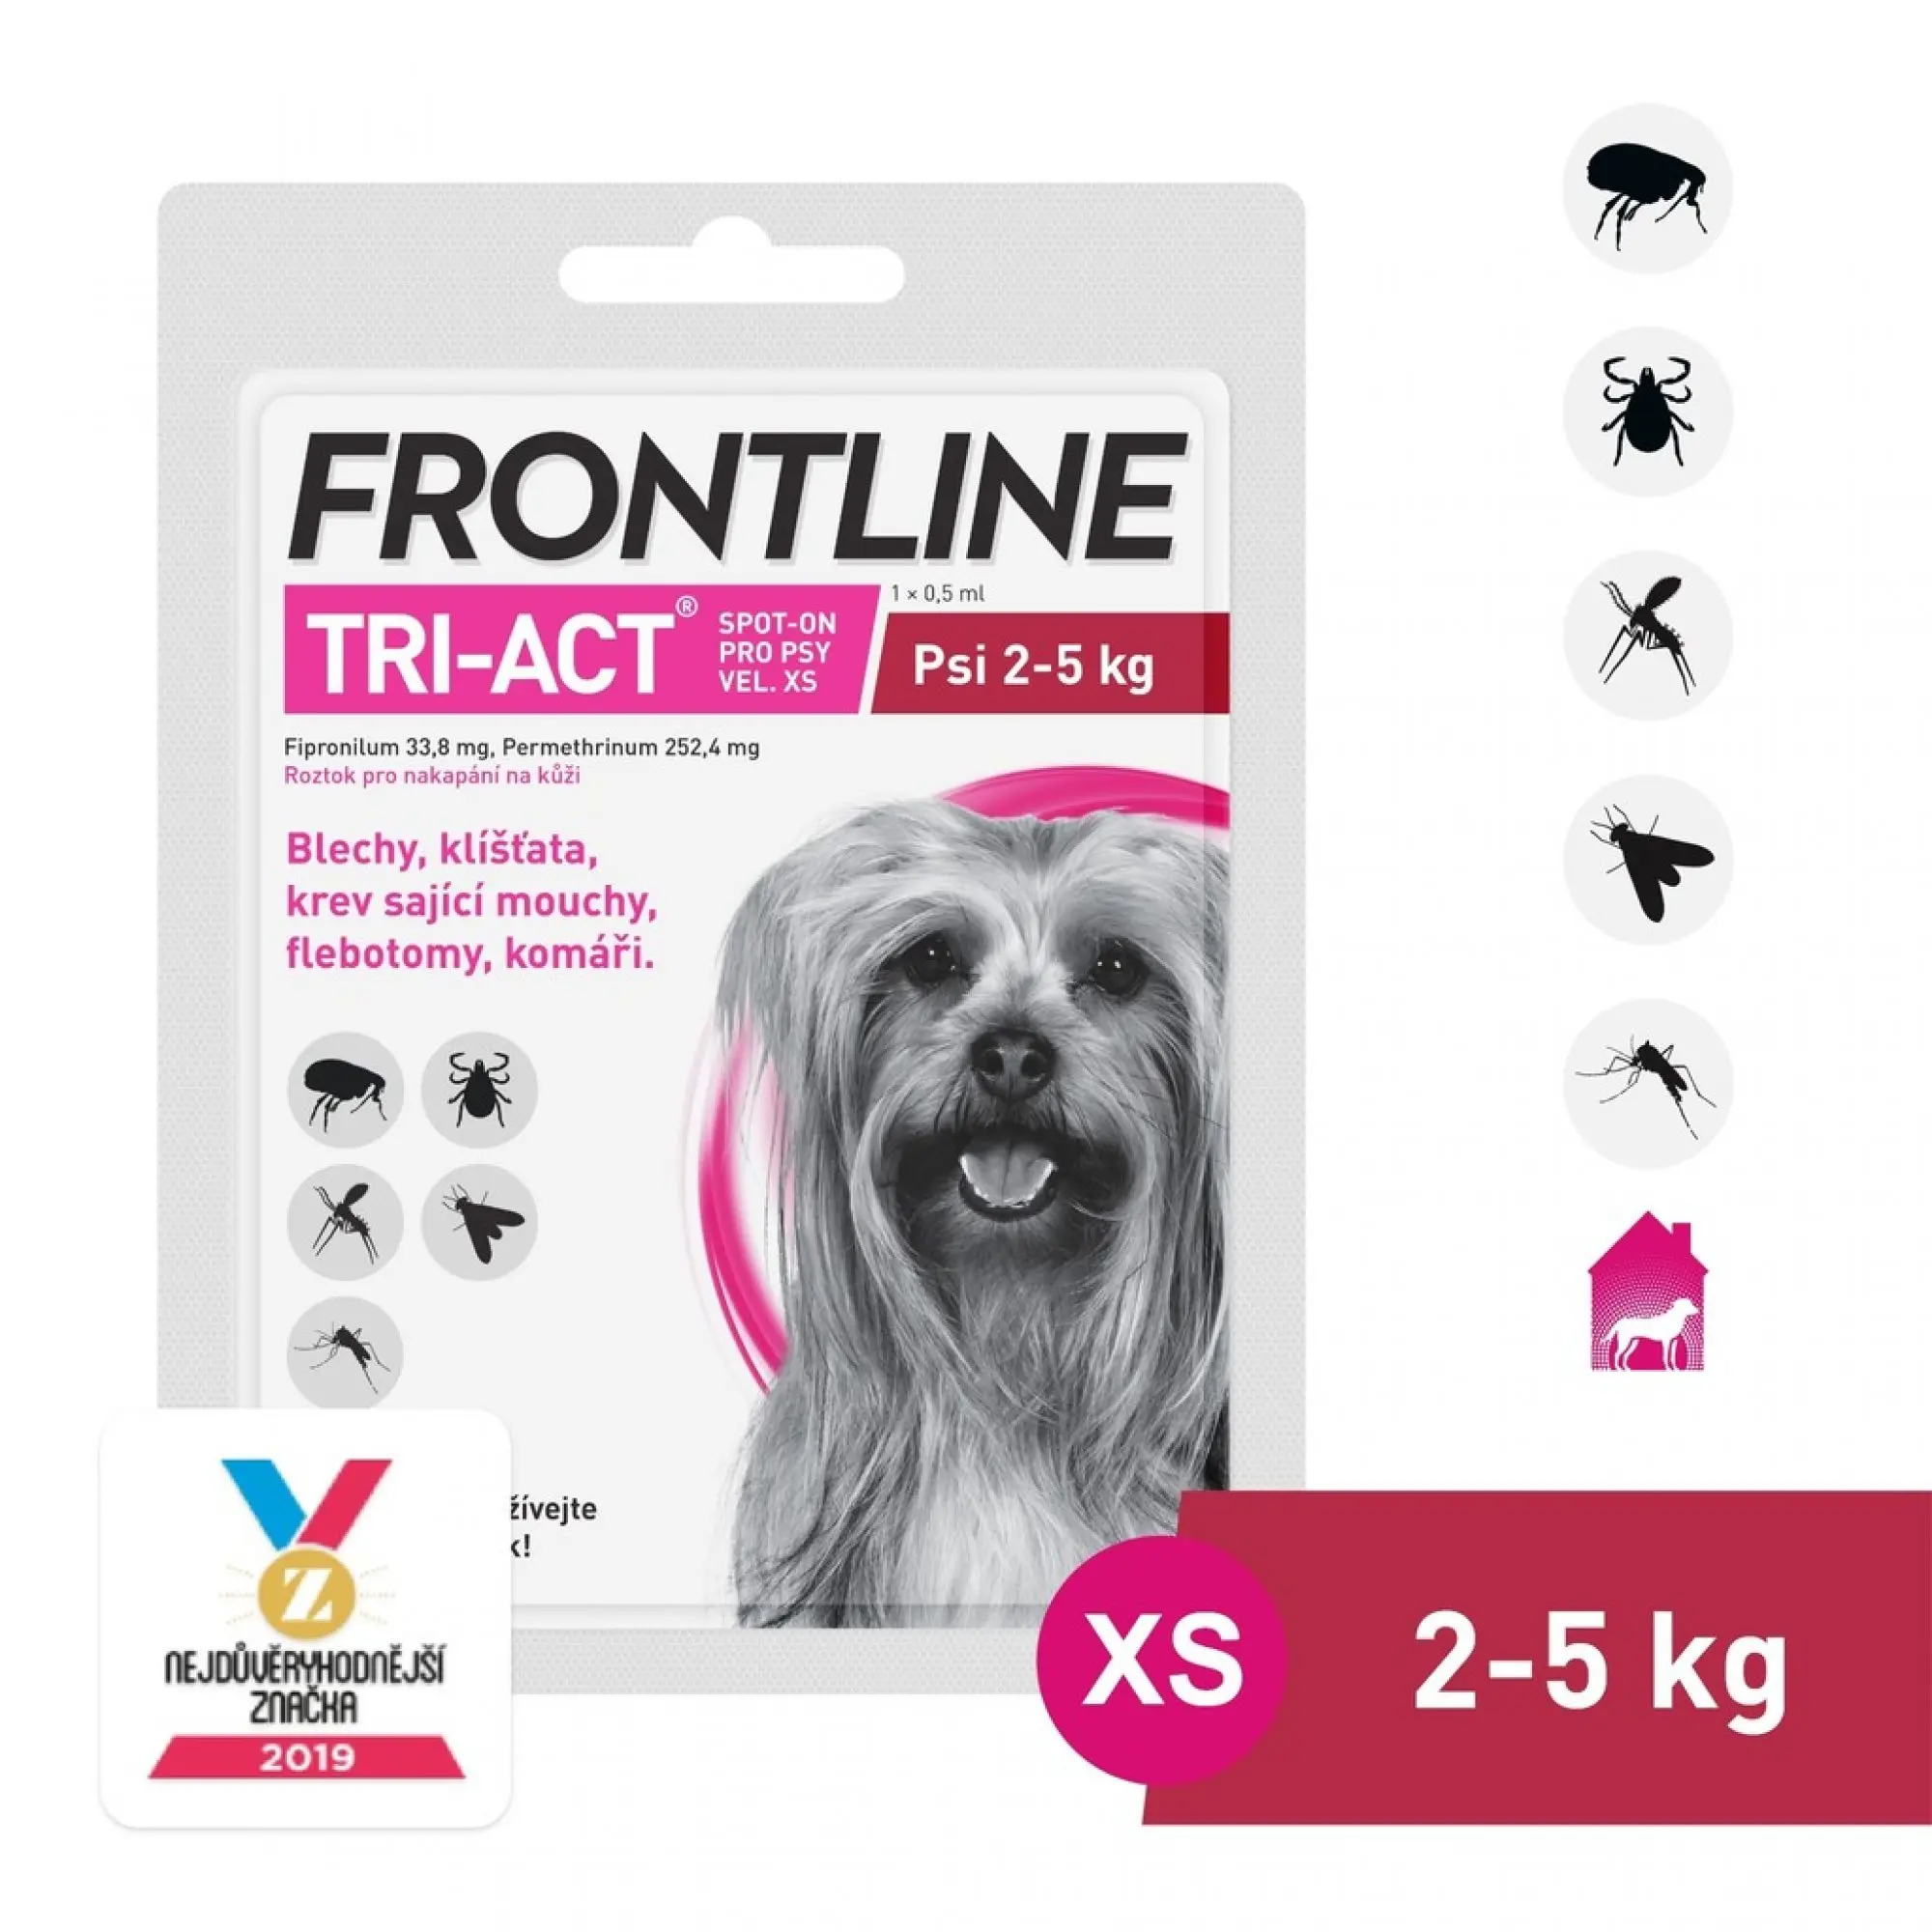 Frontline Tri-Act Spot-on pro psy XS 2-5 kg 0,5 ml